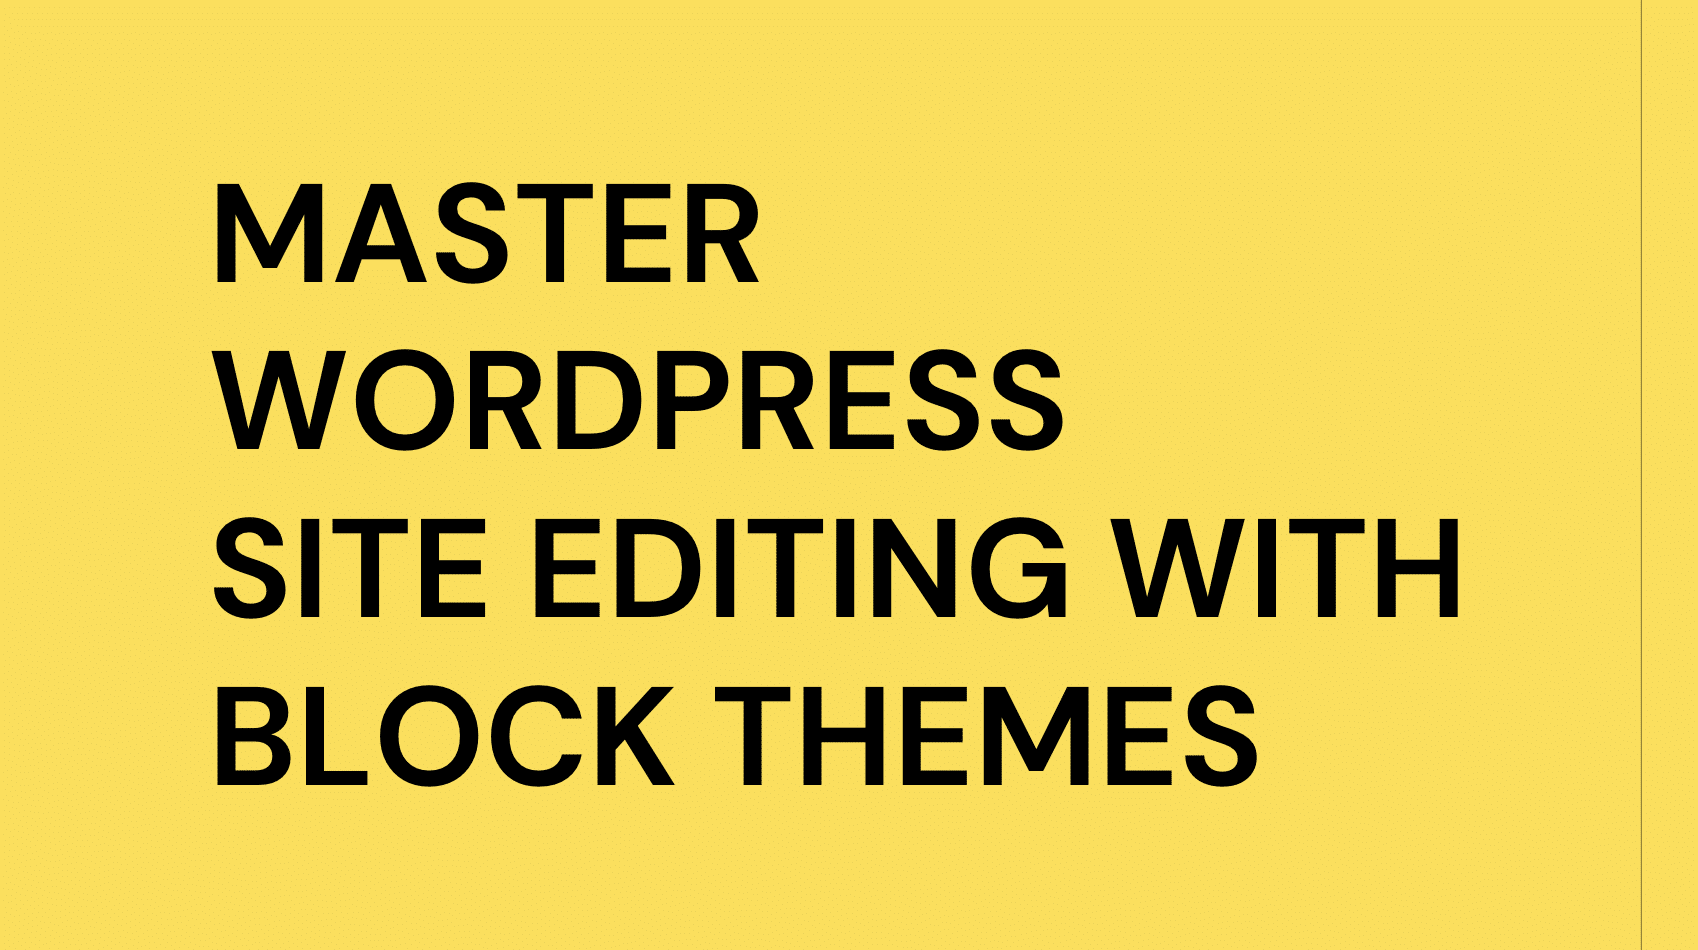 Learn WordPress Site Editing and Block Themes Course